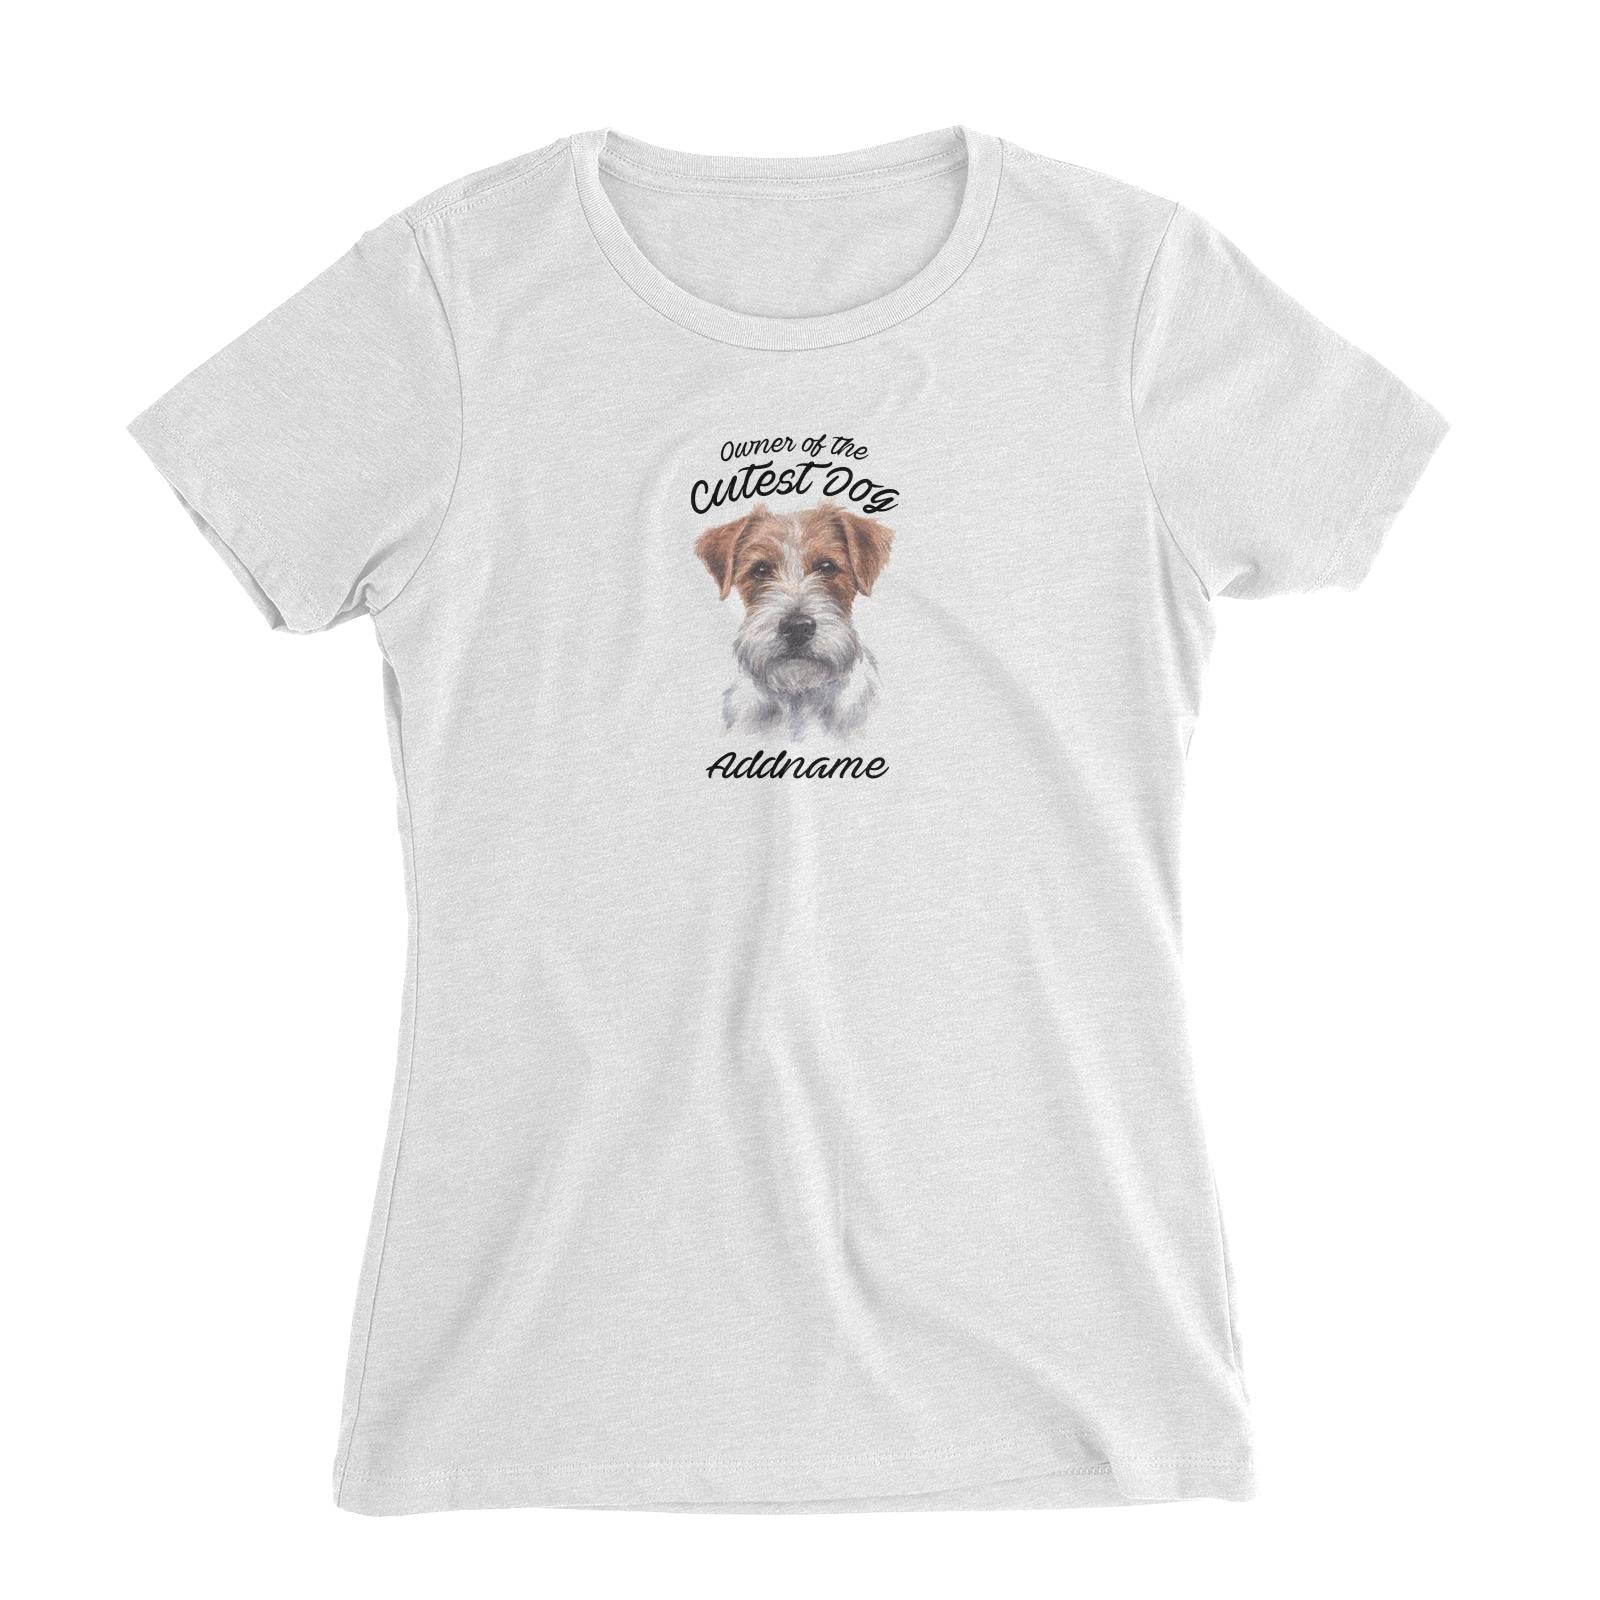 Watercolor Dog Owner Of The Cutest Dog Jack Russell Long Hair Addname Women's Slim Fit T-Shirt